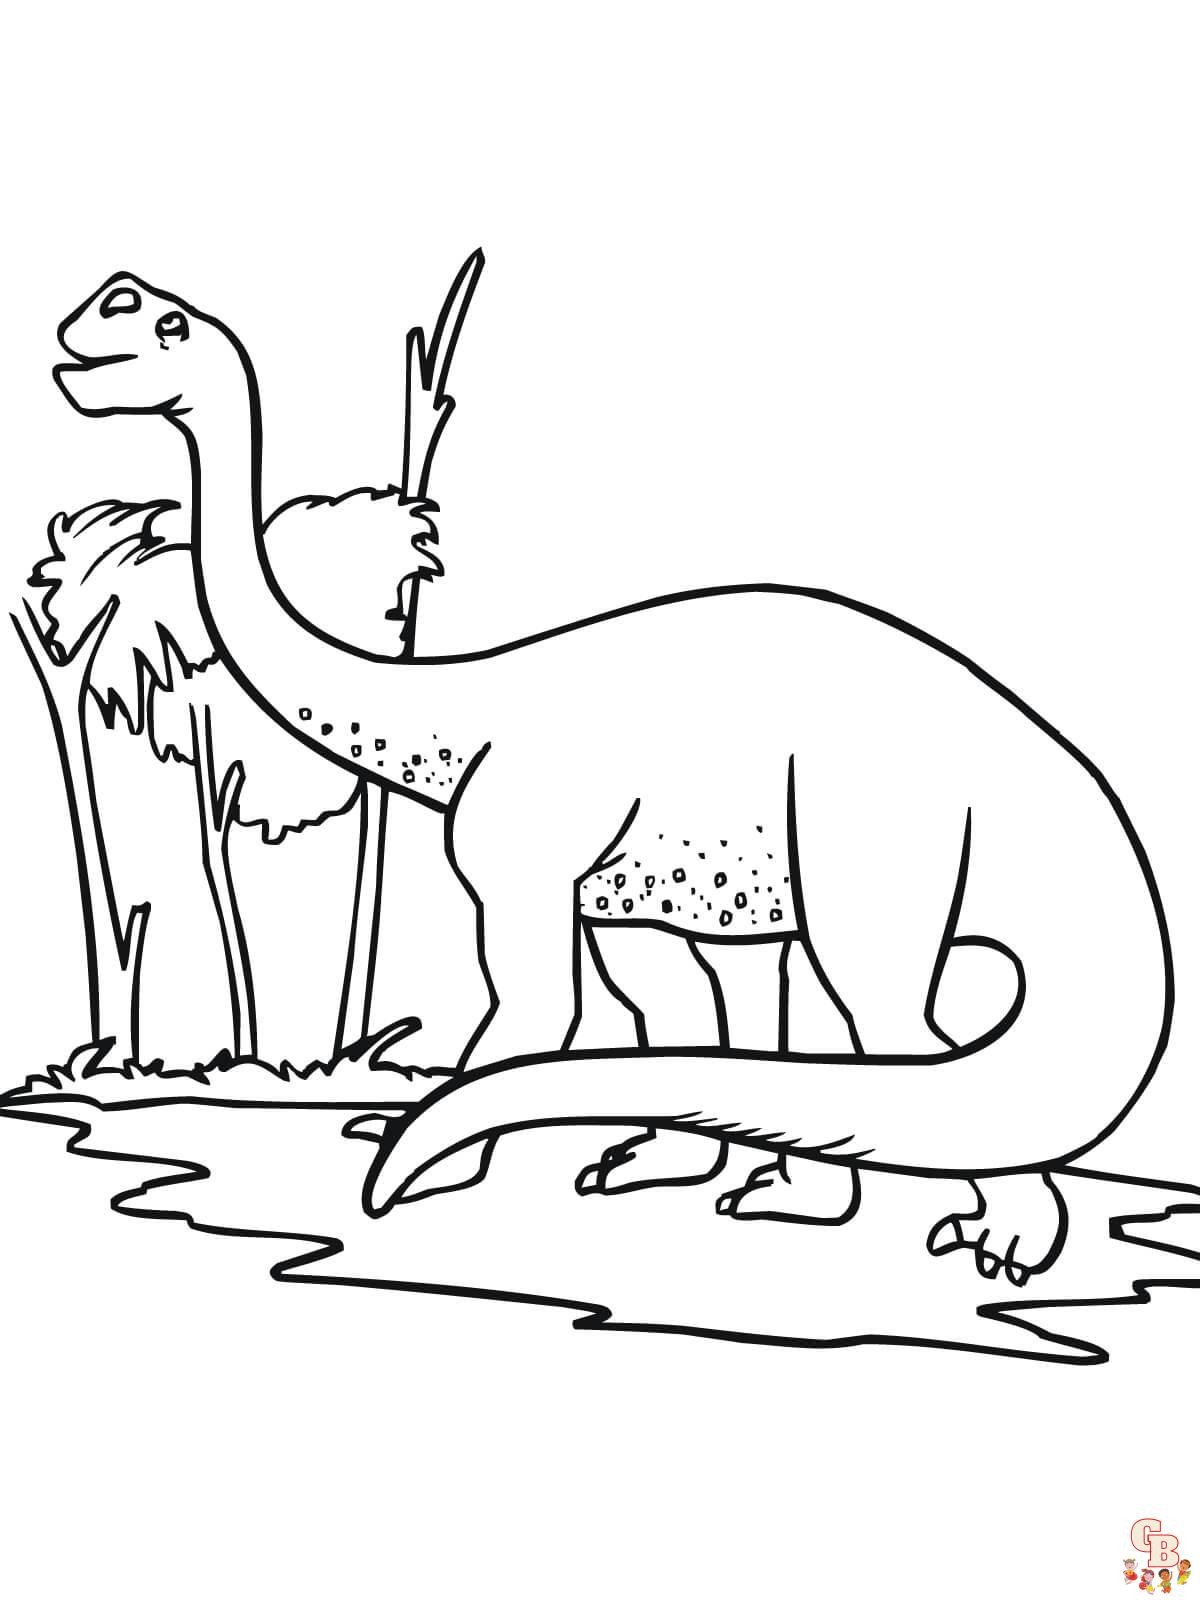 Brontosaurus Coloring Pages 3